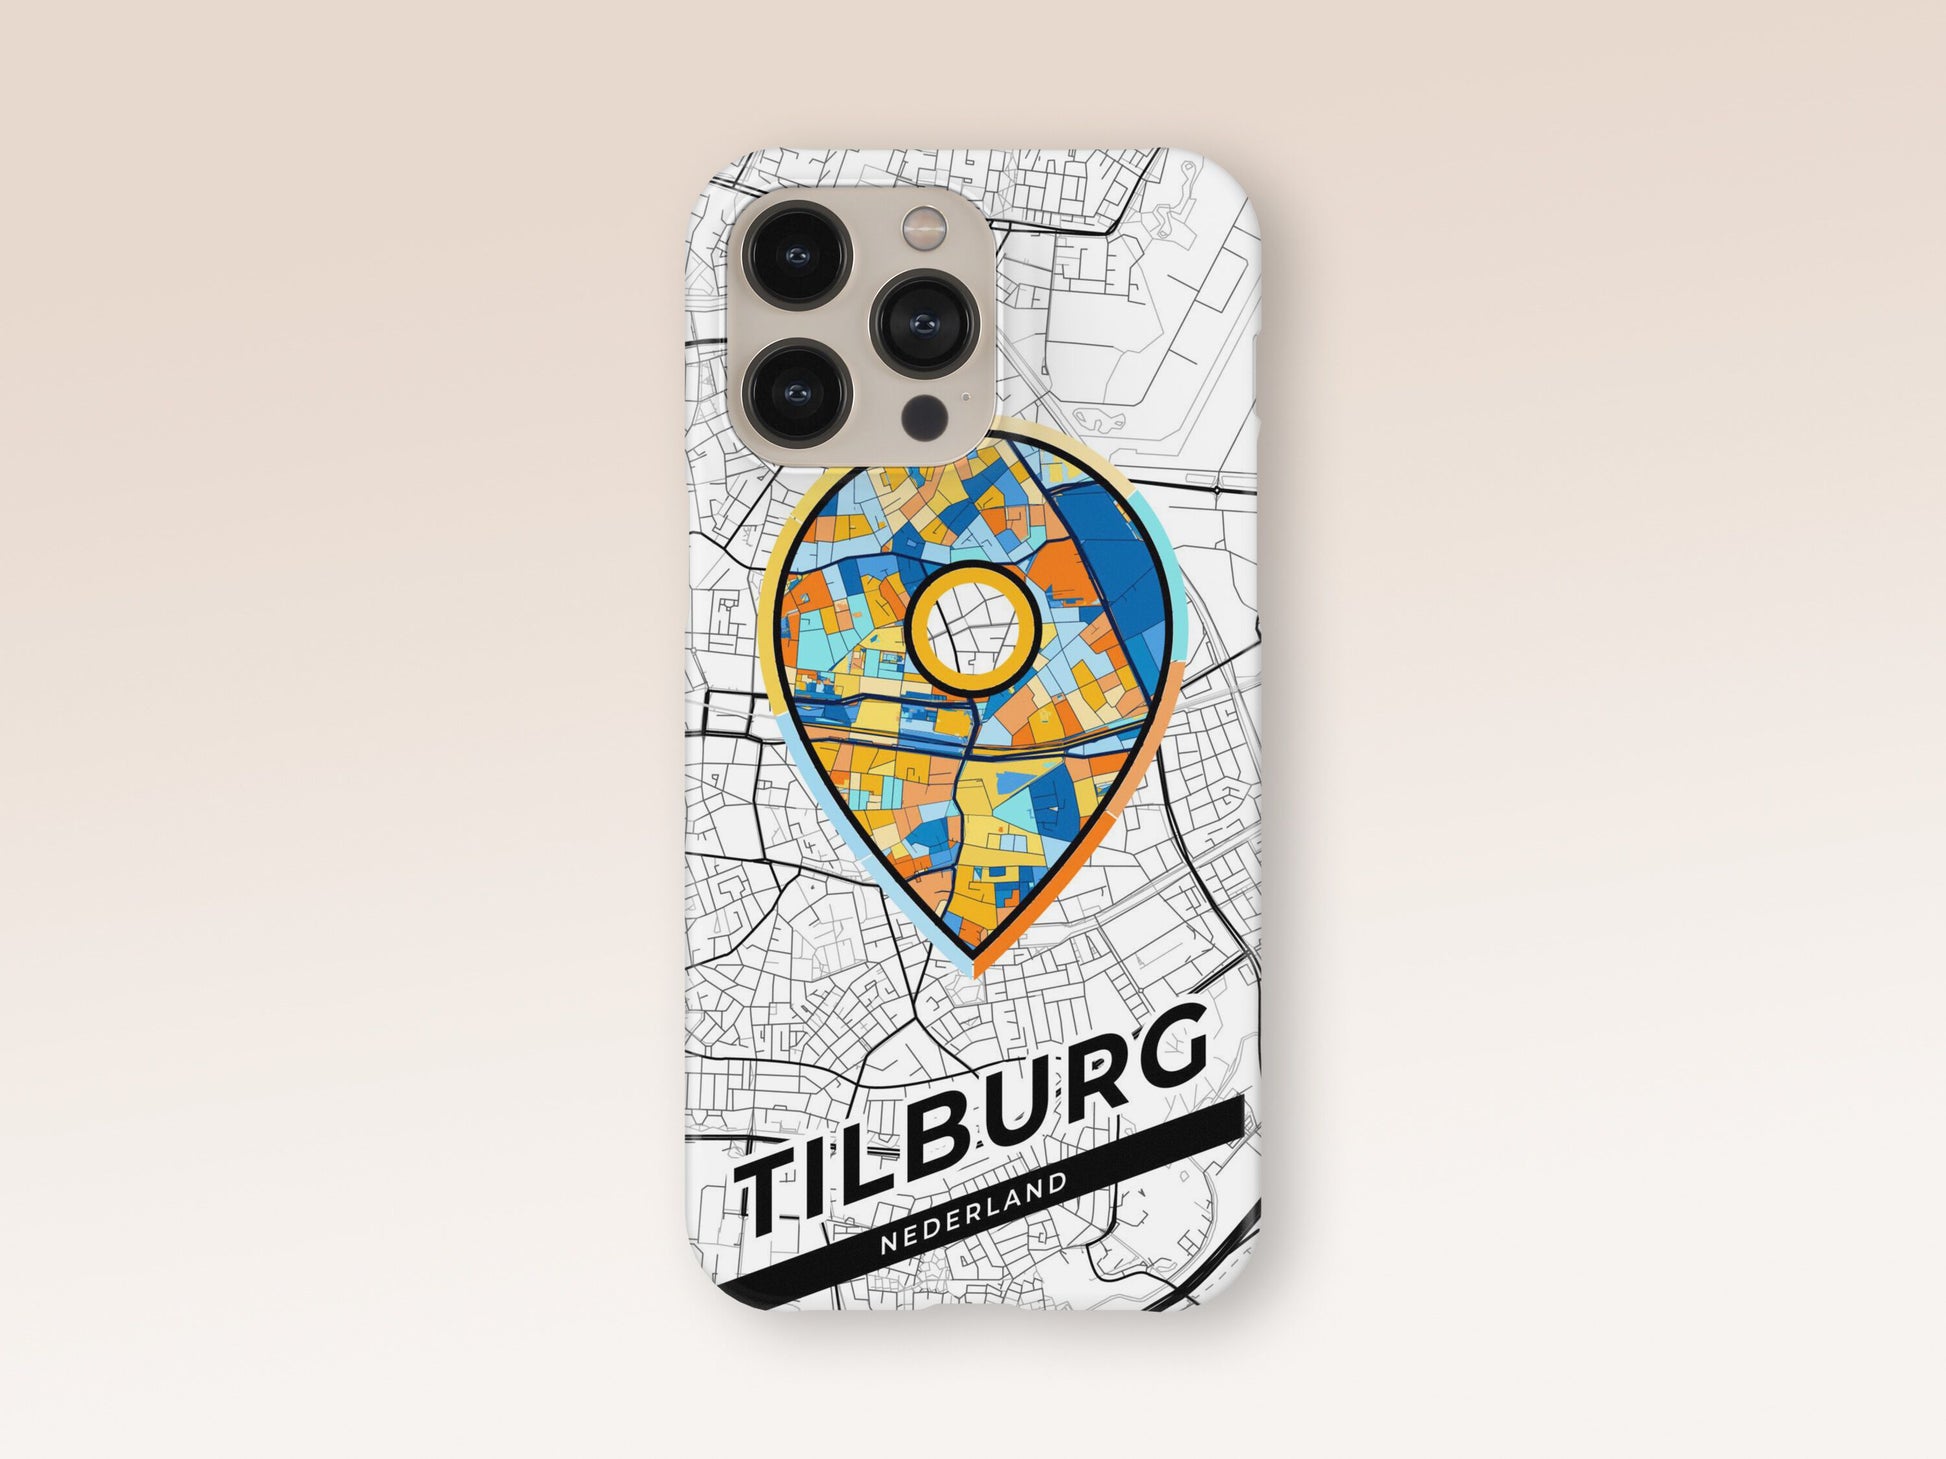 Tilburg Netherlands slim phone case with colorful icon. Birthday, wedding or housewarming gift. Couple match cases. 1